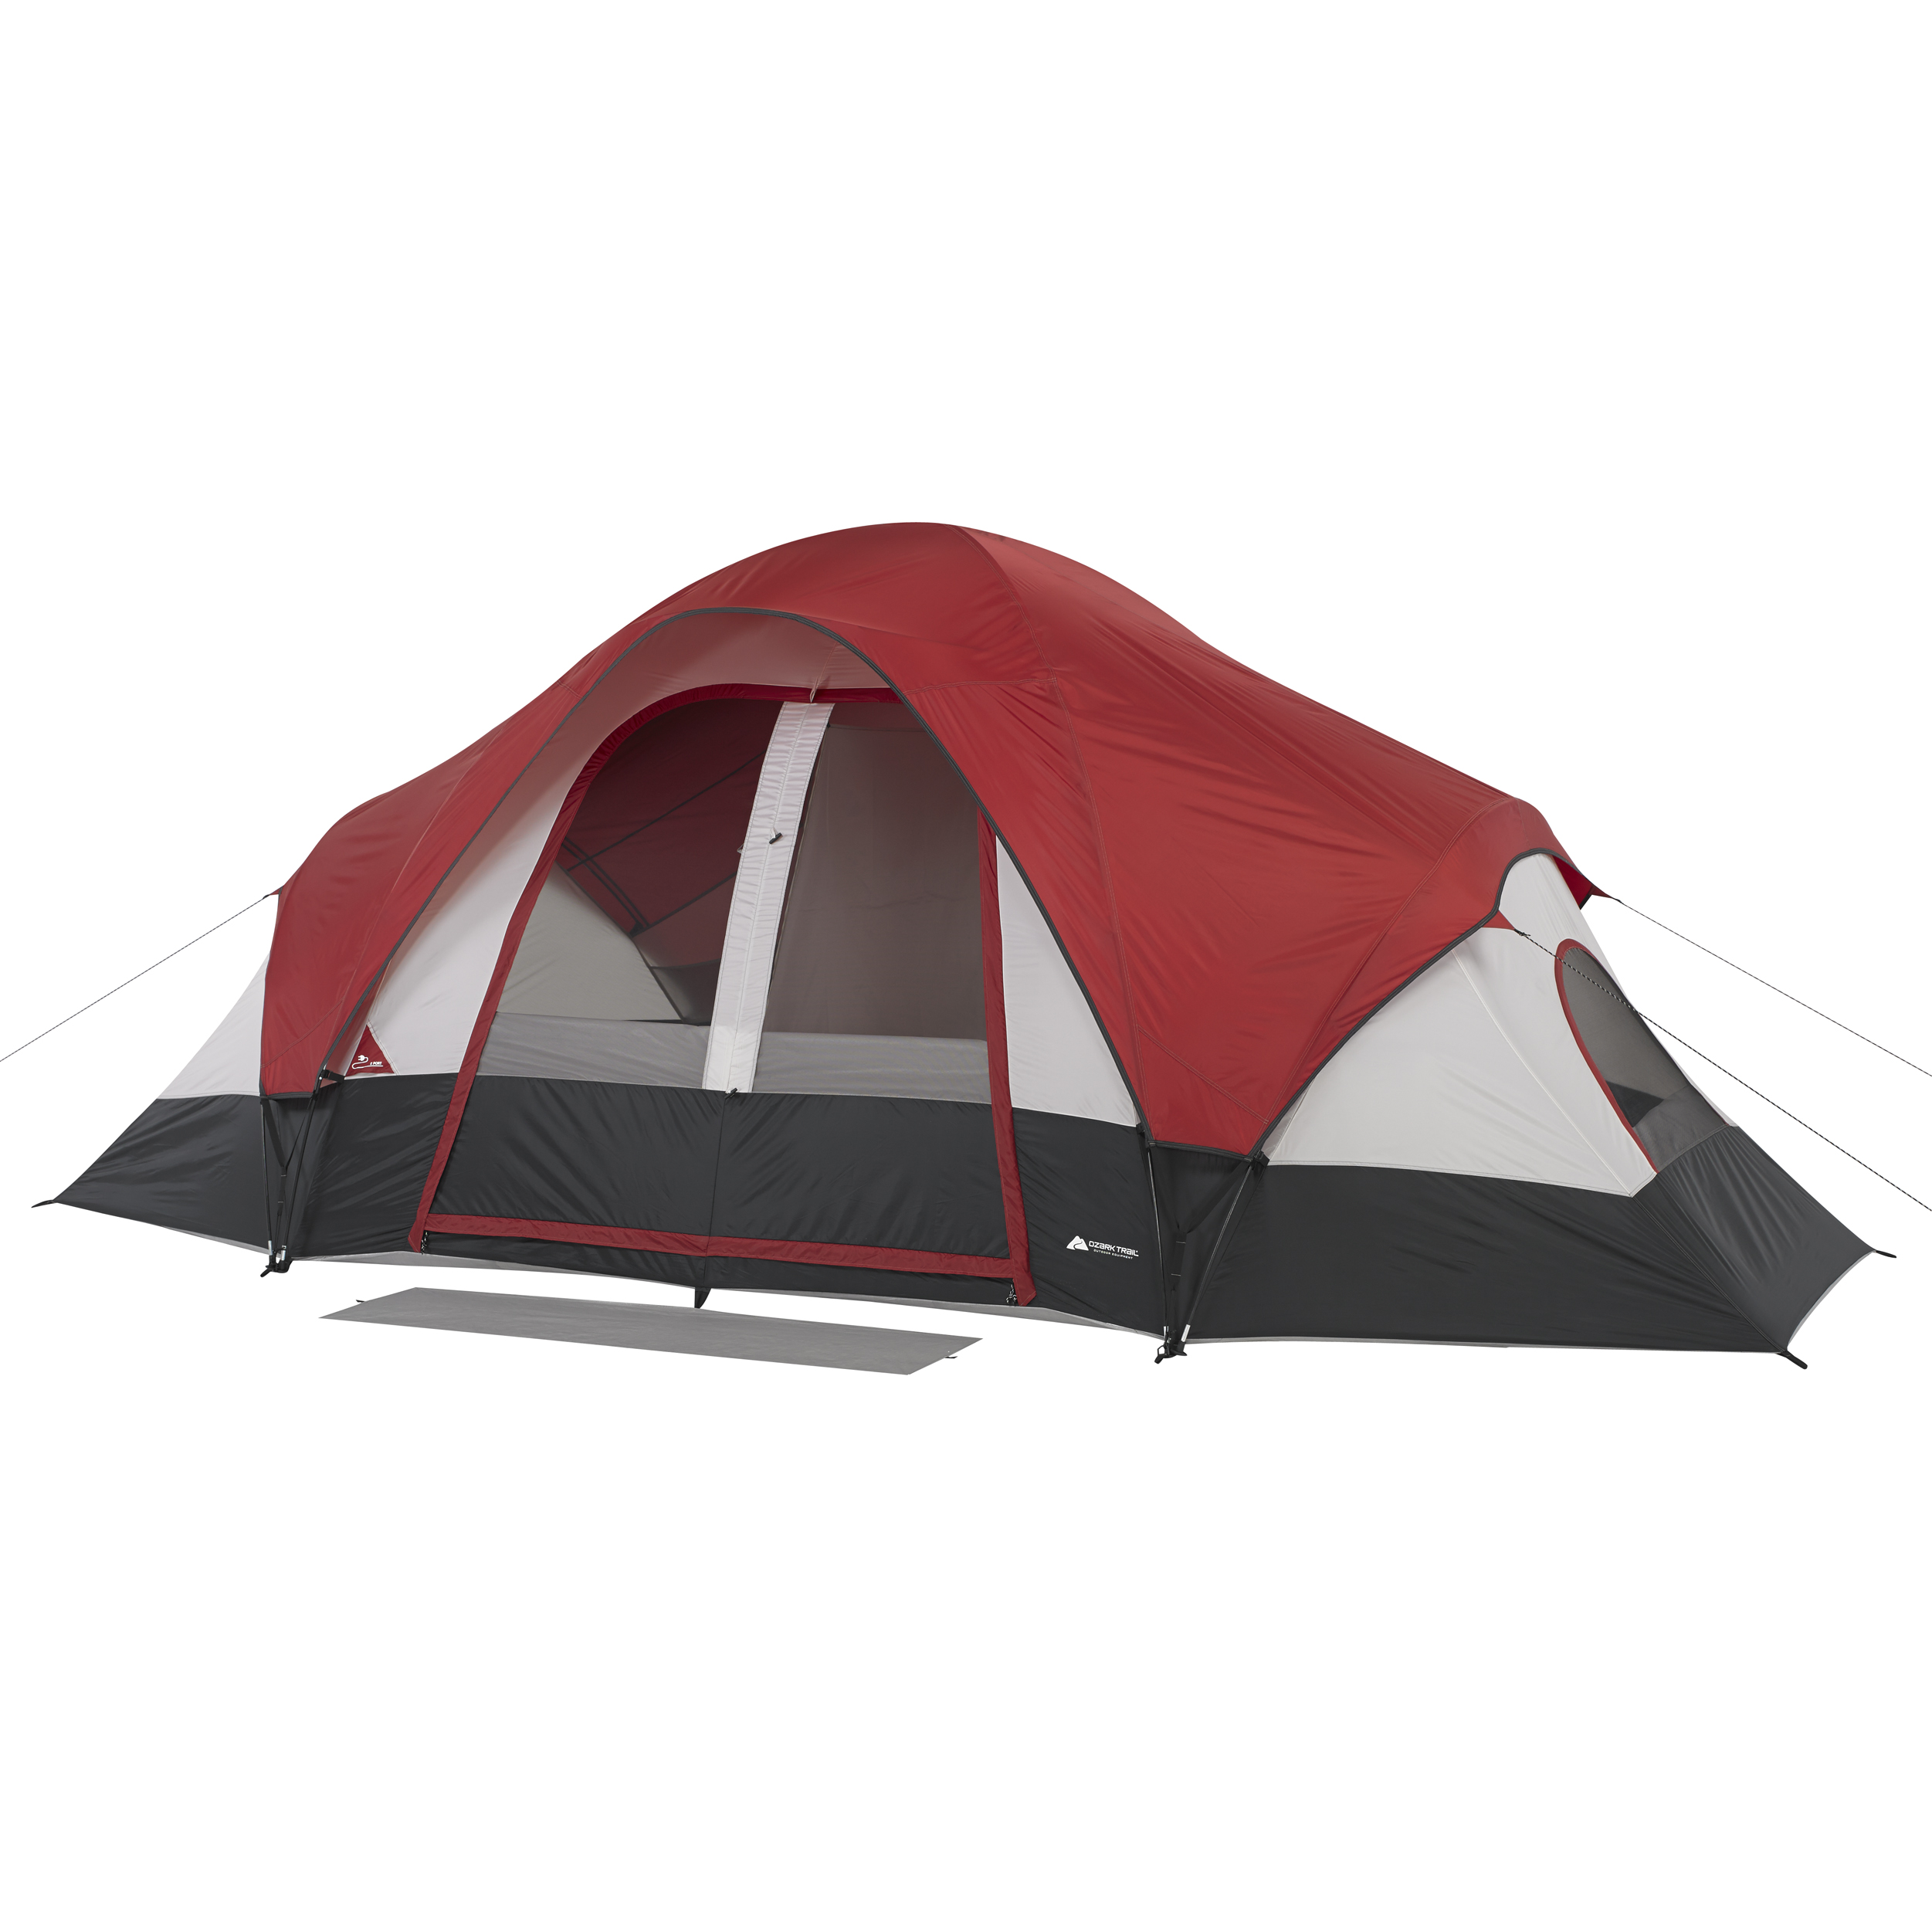 Ozark Trail 8-Person Modified Dome Tent, with Rear Window - image 1 of 12